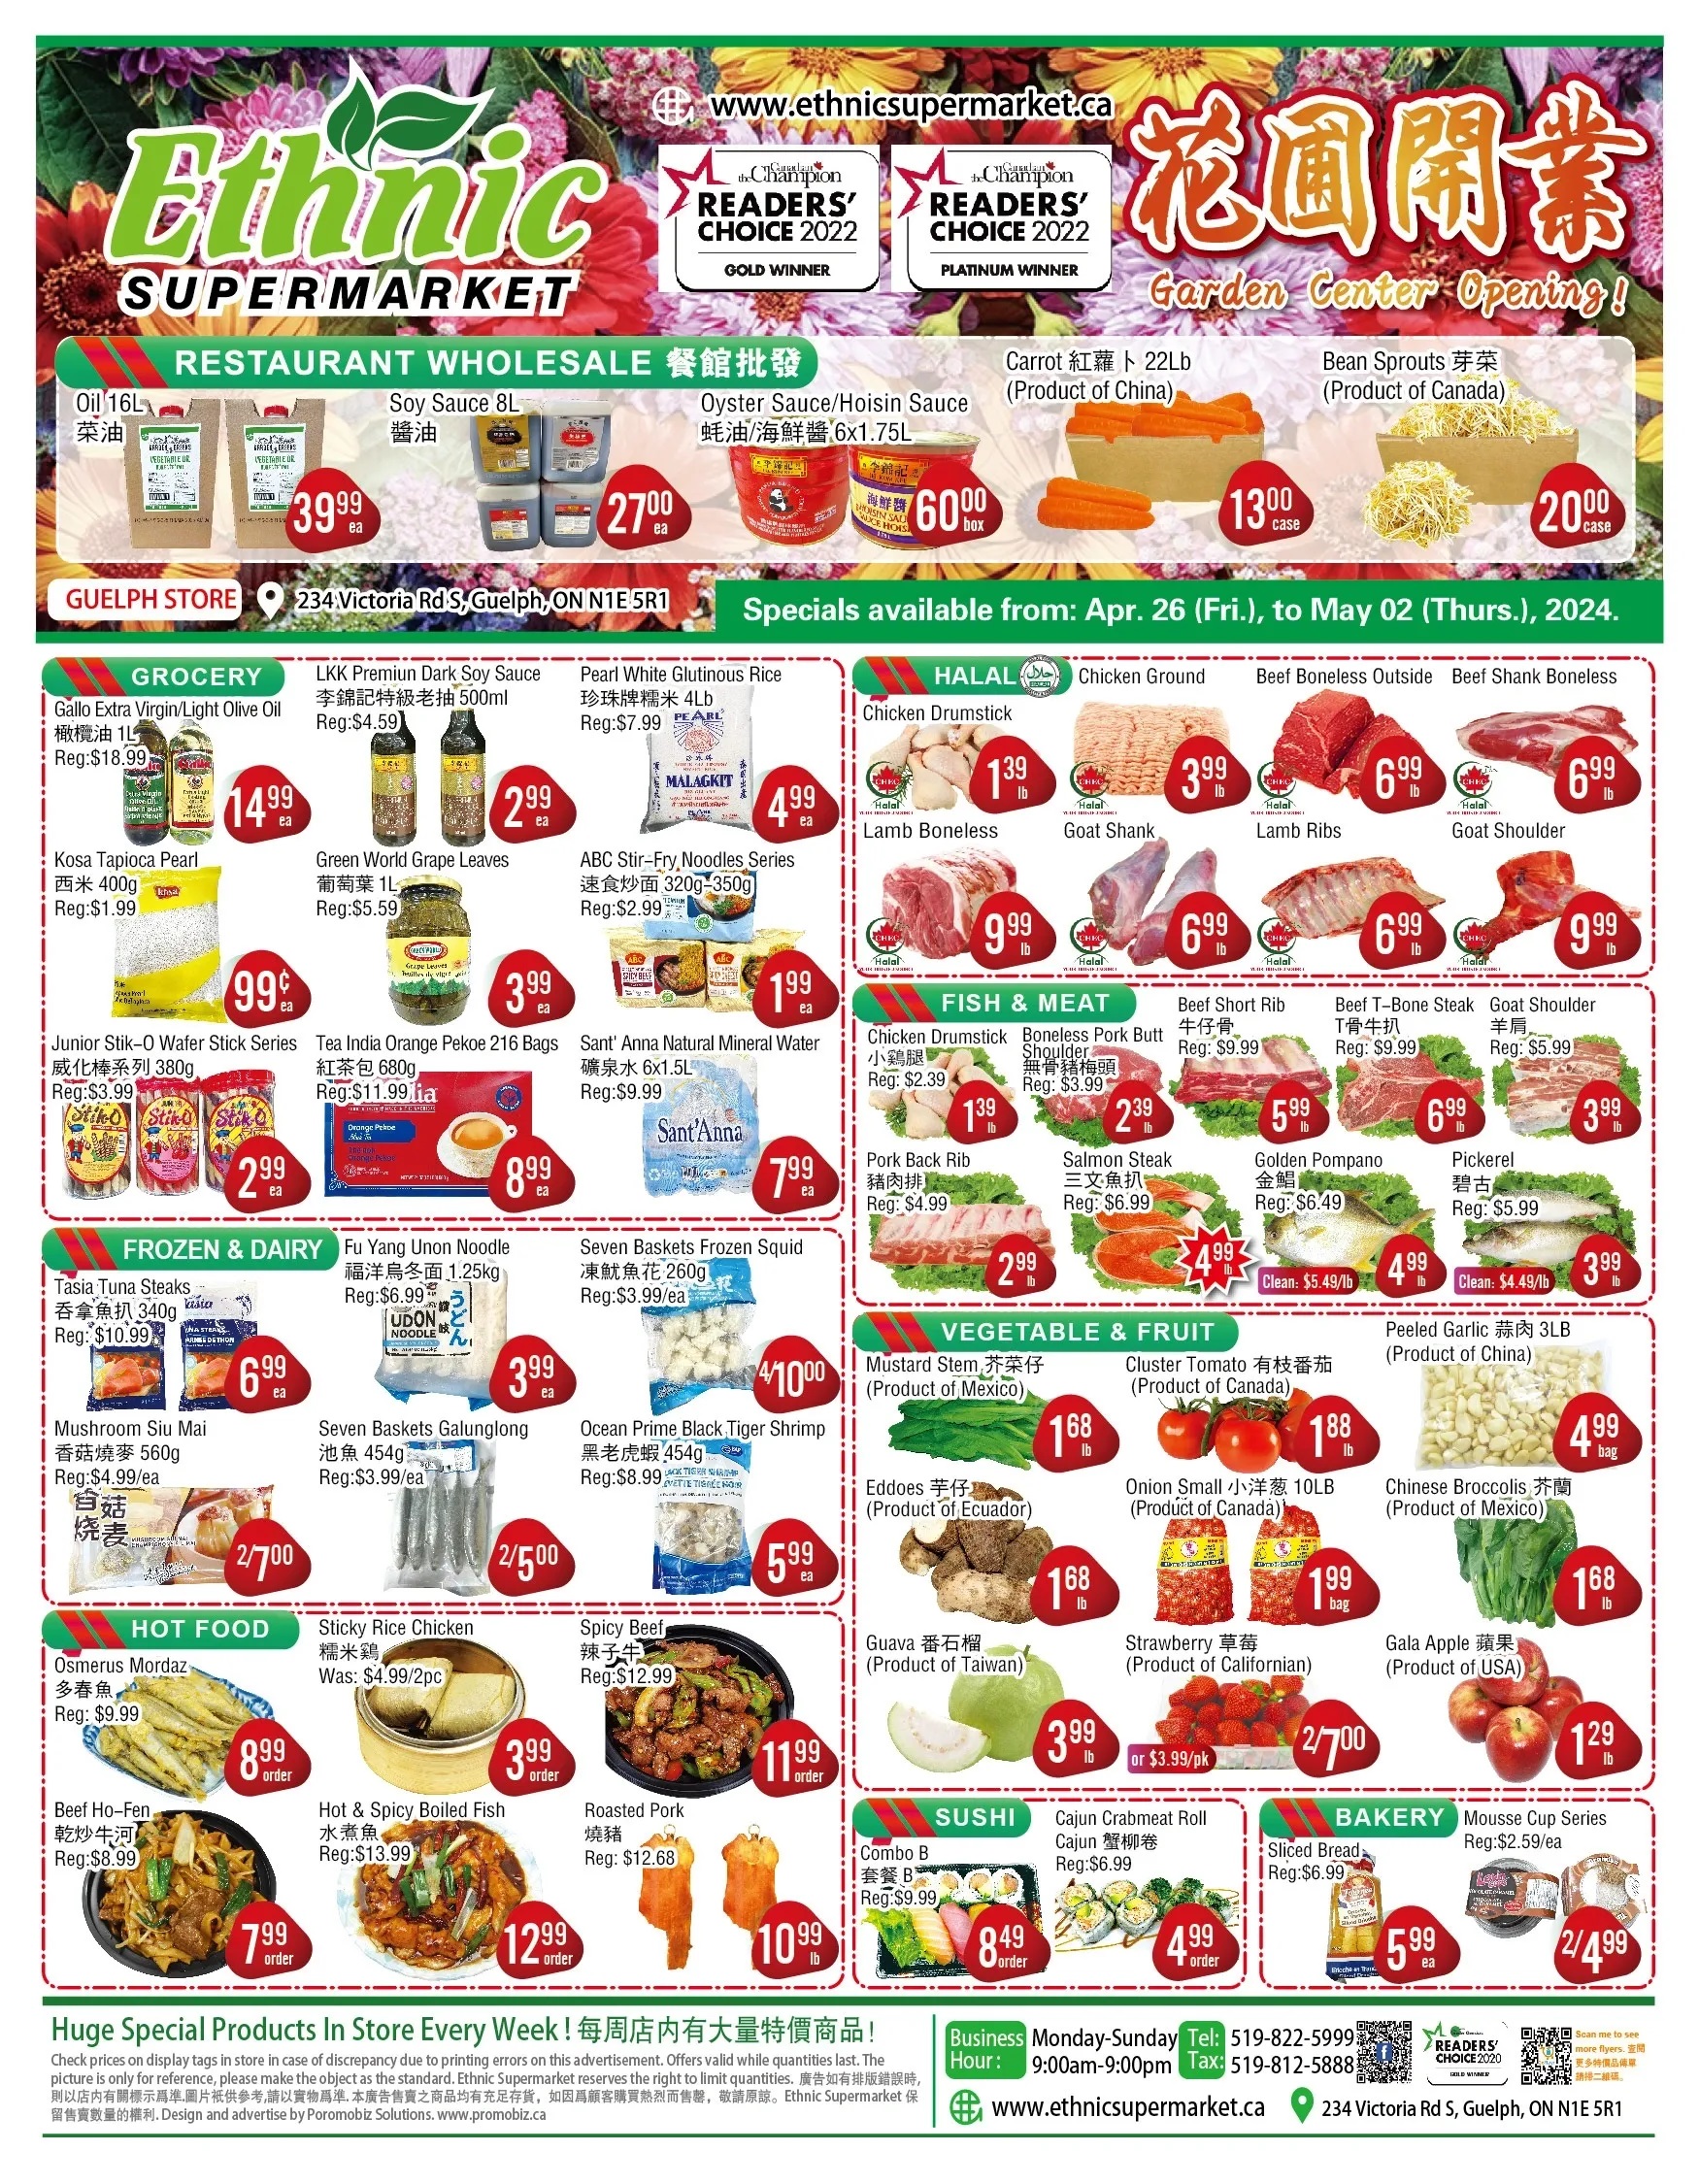 Ethnic Supermarket - Guelph - Weekly Flyer Specials